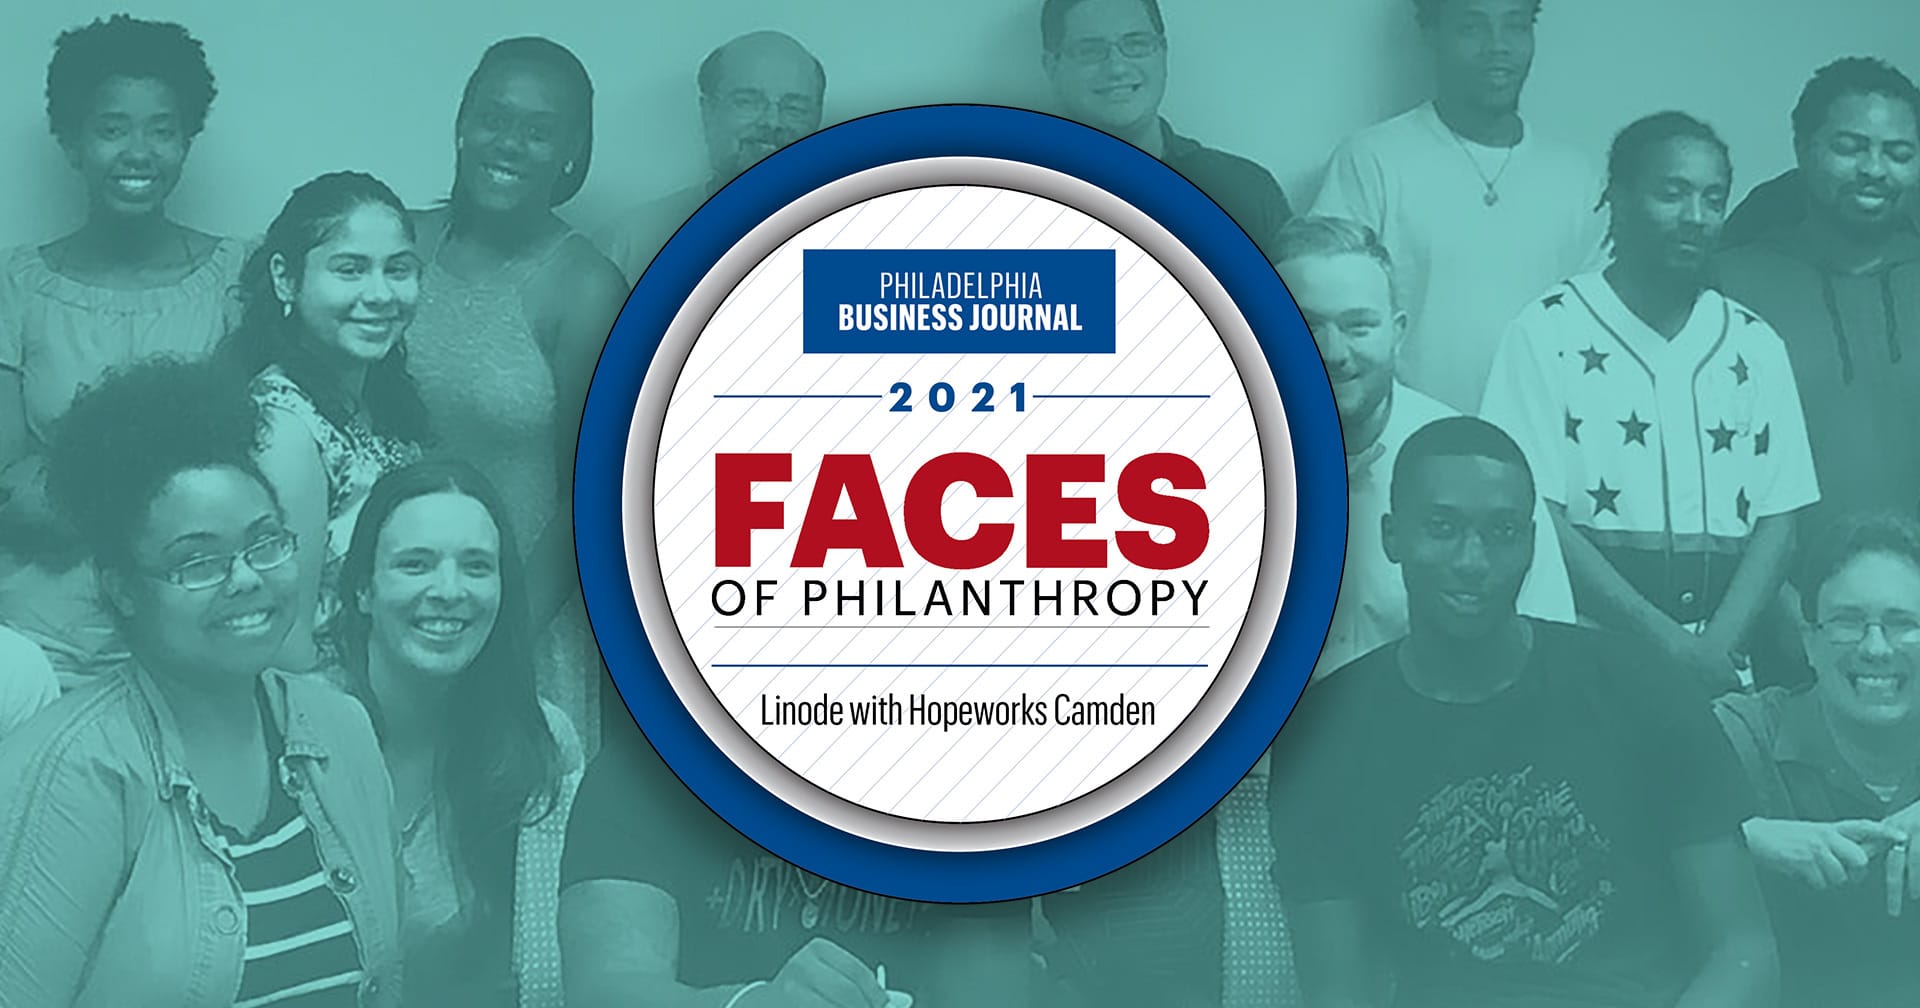 Linode Honored with Faces of Philanthropy Award